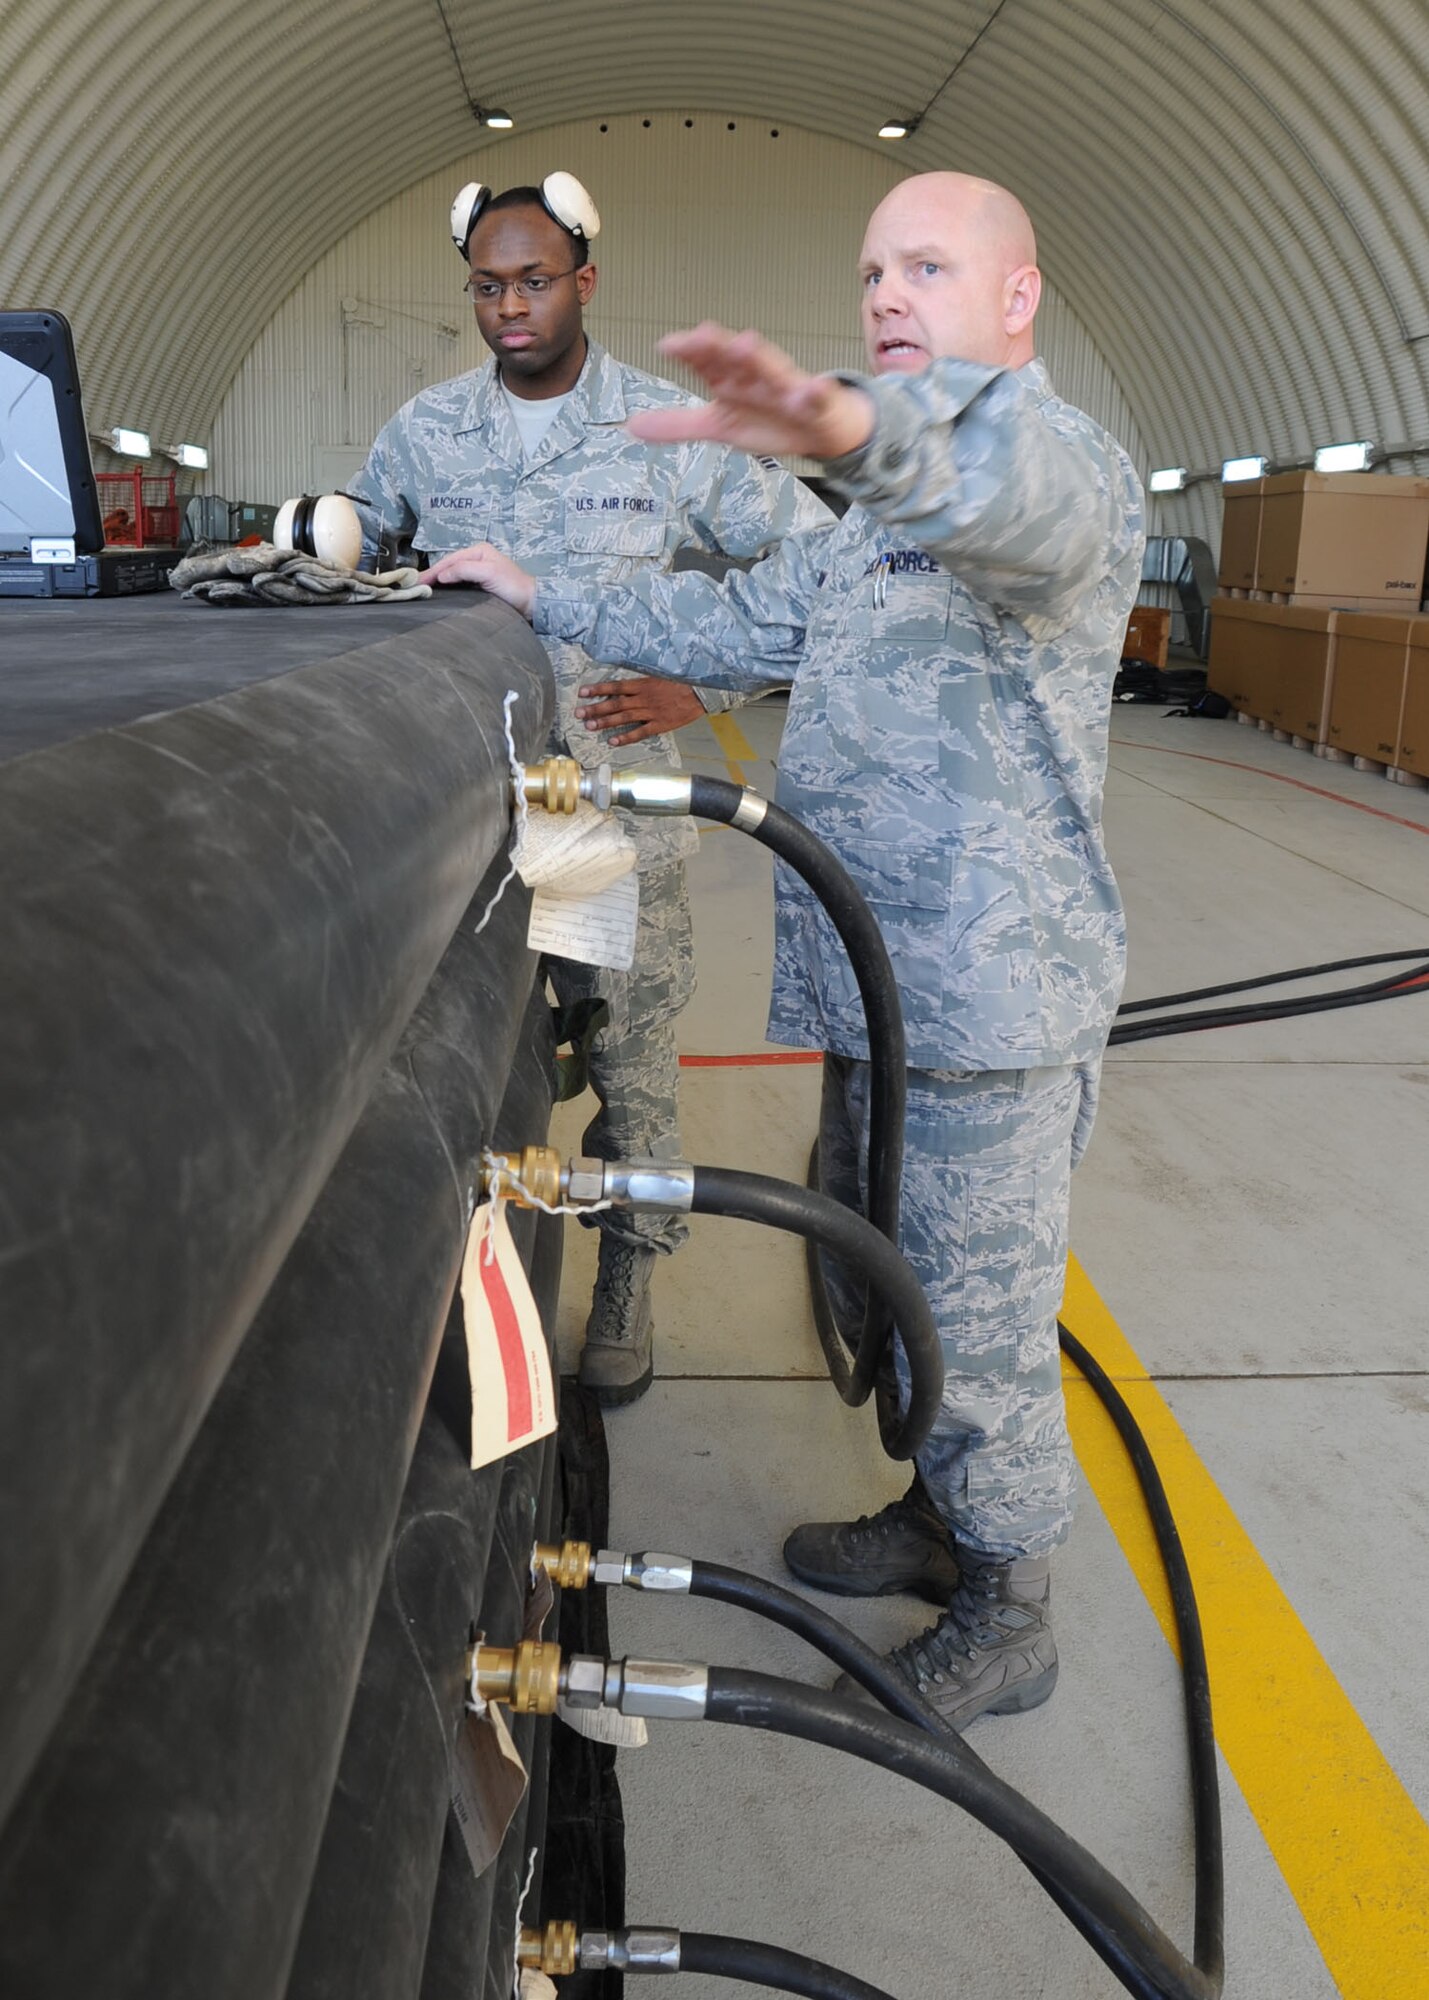 Tech. Sgt. Robert Jackson 39th Maintenance Squadron, Crash Disabled Damaged Aircraft Recovery team chief explains the capabilities of the pneumatic airbag to Col. Craig Wills, 39th Air Base Wing commander, and Chief Master Sgt. Anthony Johnson, 39th ABW command chief, Jan. 23, 2014, at Incirlik Air Base, Turkey.  The team demonstrated of the squadrons Crash Disabled Damaged Aircraft Recovery capability. The air-bag technique is a last resort process, which provides lift capabilities in the event of a damaged aircraft. The CDDAR team maintains the training and knowledge to safely lift a damaged airframe. (U.S. Air Force photo by Staff Sgt. Veronica Pierce/Released)